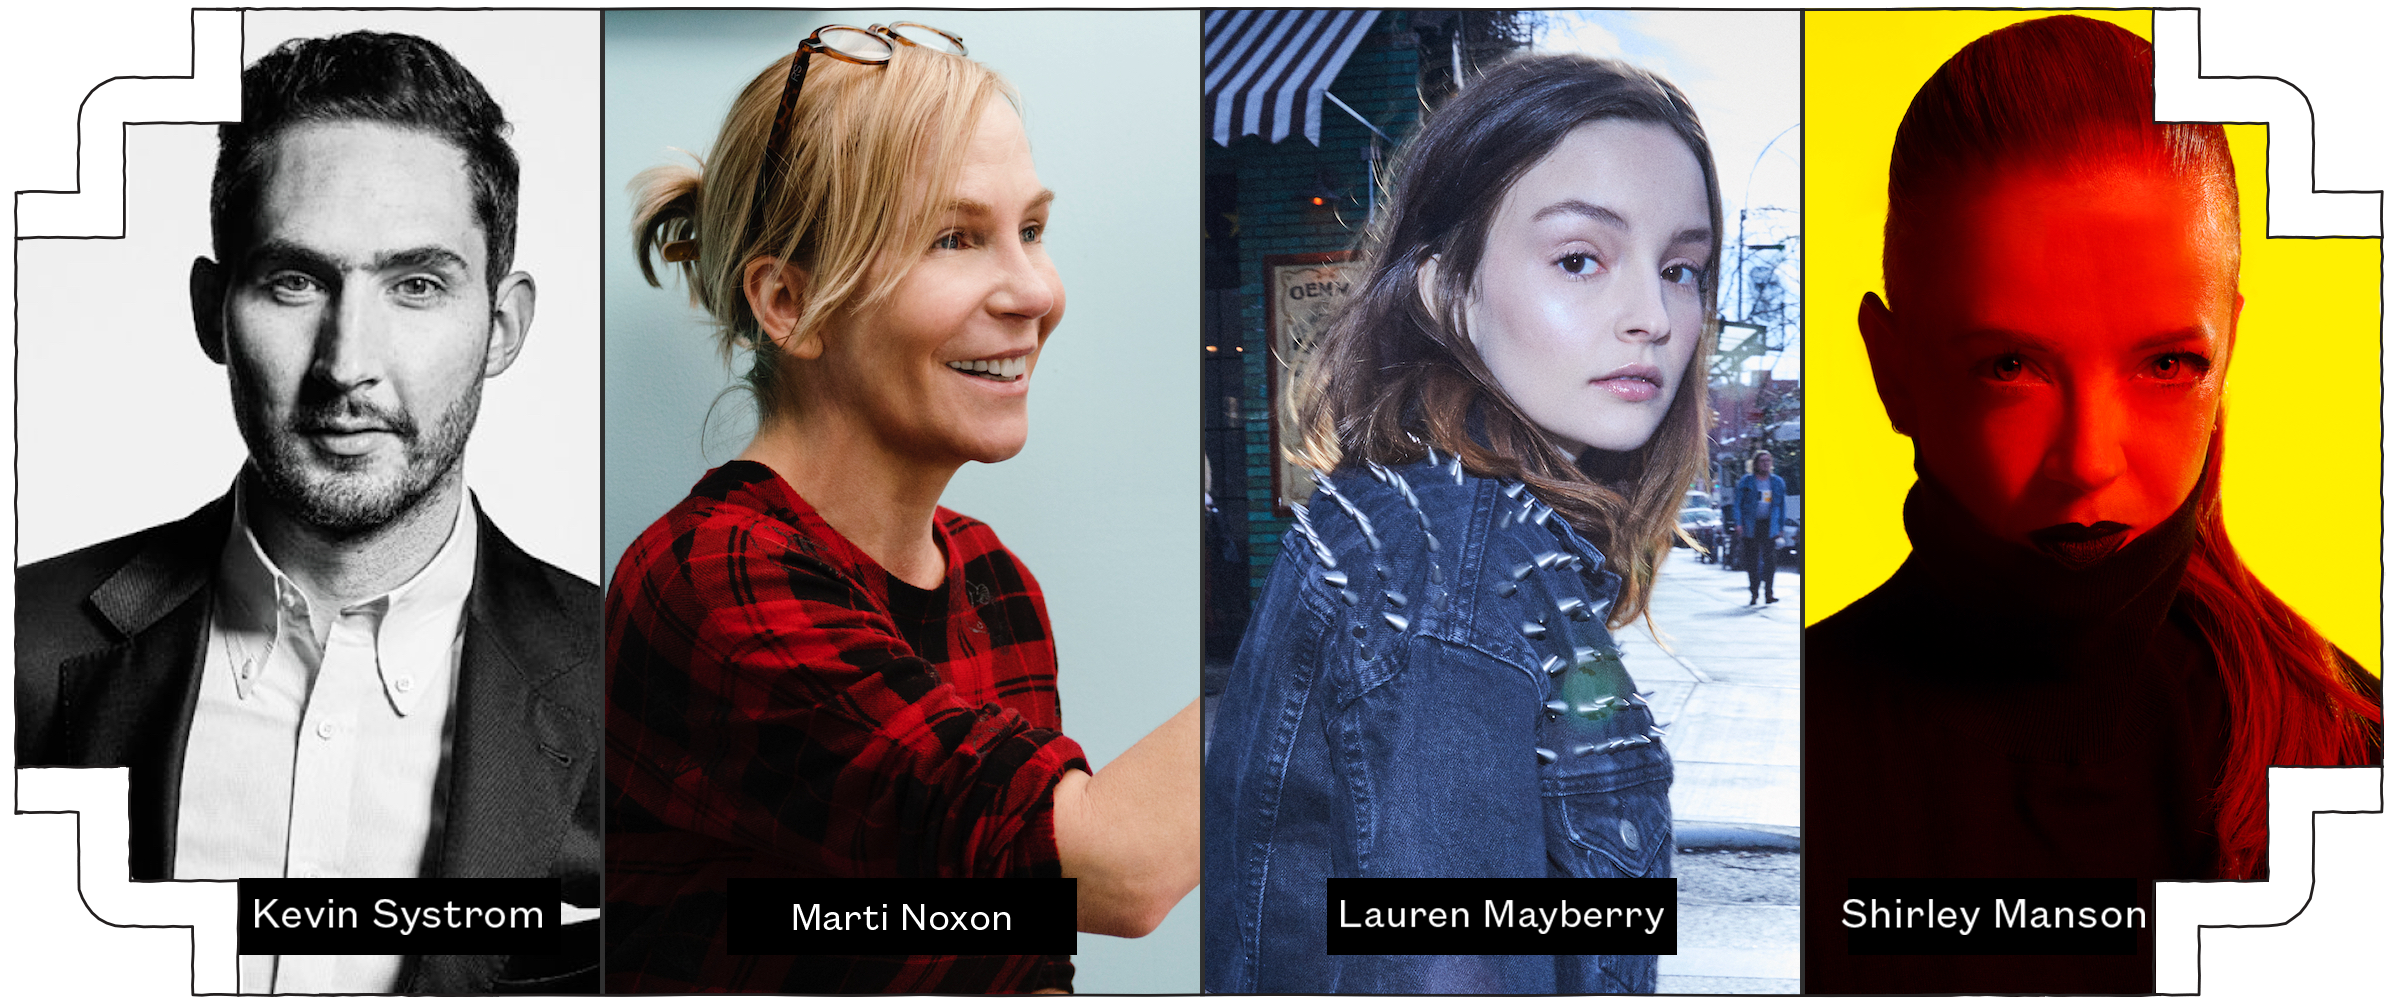 2019 SXSW Keynotes – Kevin Systrom, Marti Noxon (Photo by Patrick Harbron, AMC), Lauren Mayberry, and Shirley Manson